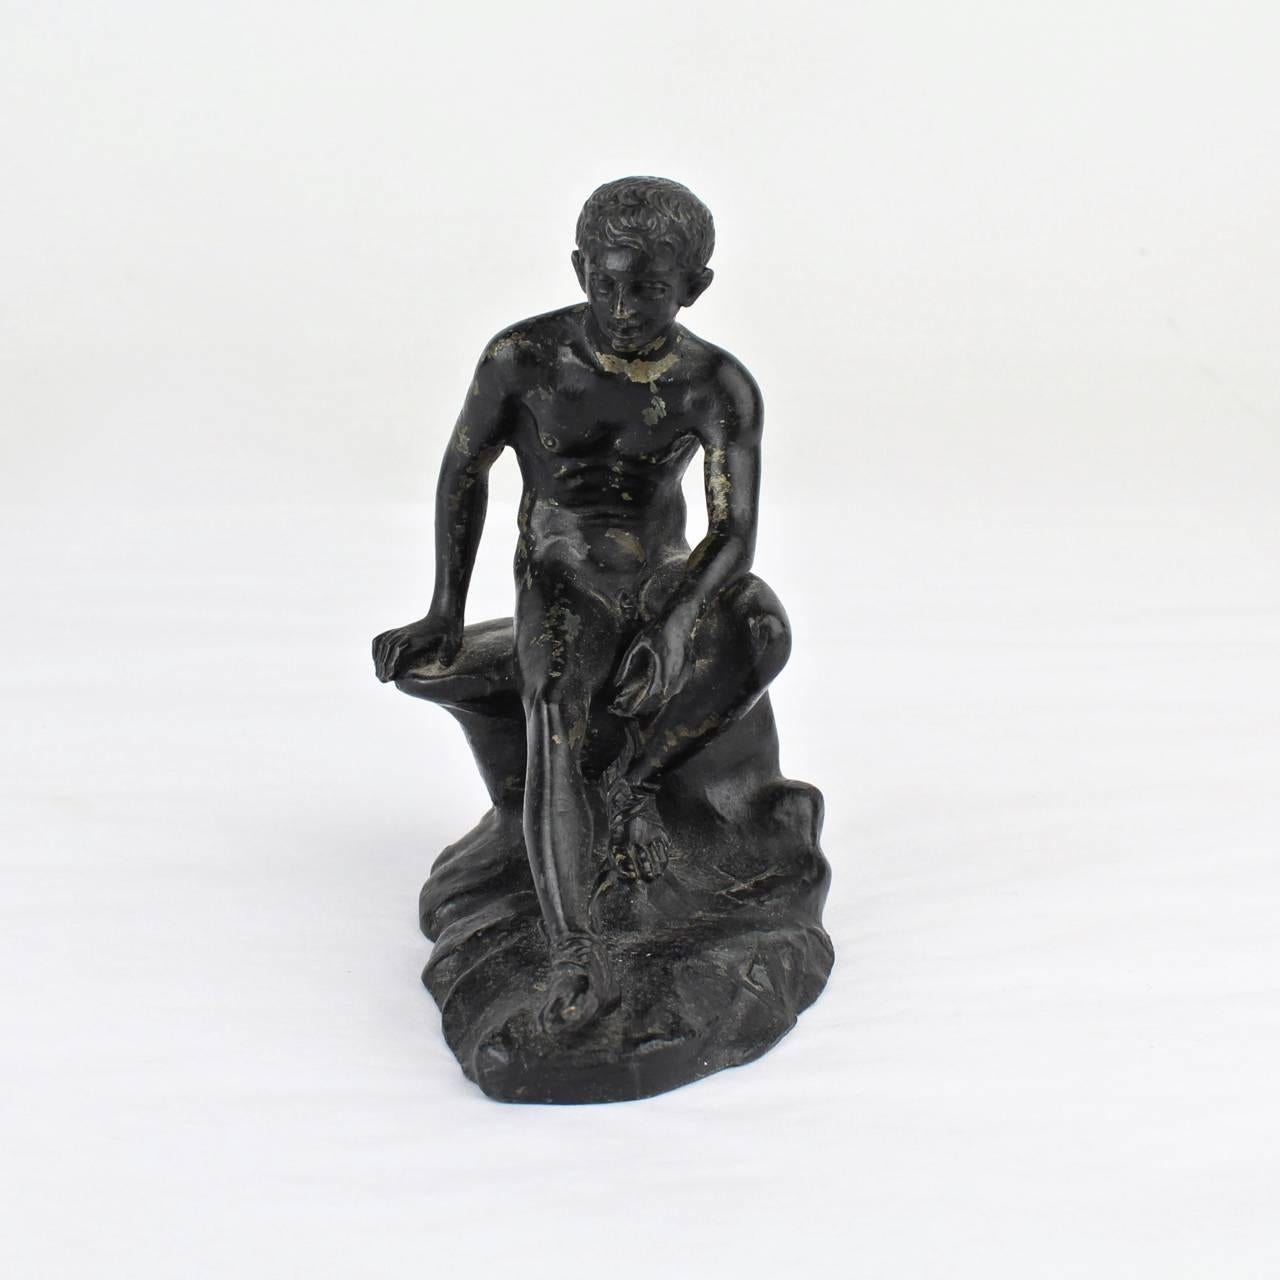 19th Century Antique Miniature Grand Tour Bronze Sculpture of a Seated Hermes After Lysippos